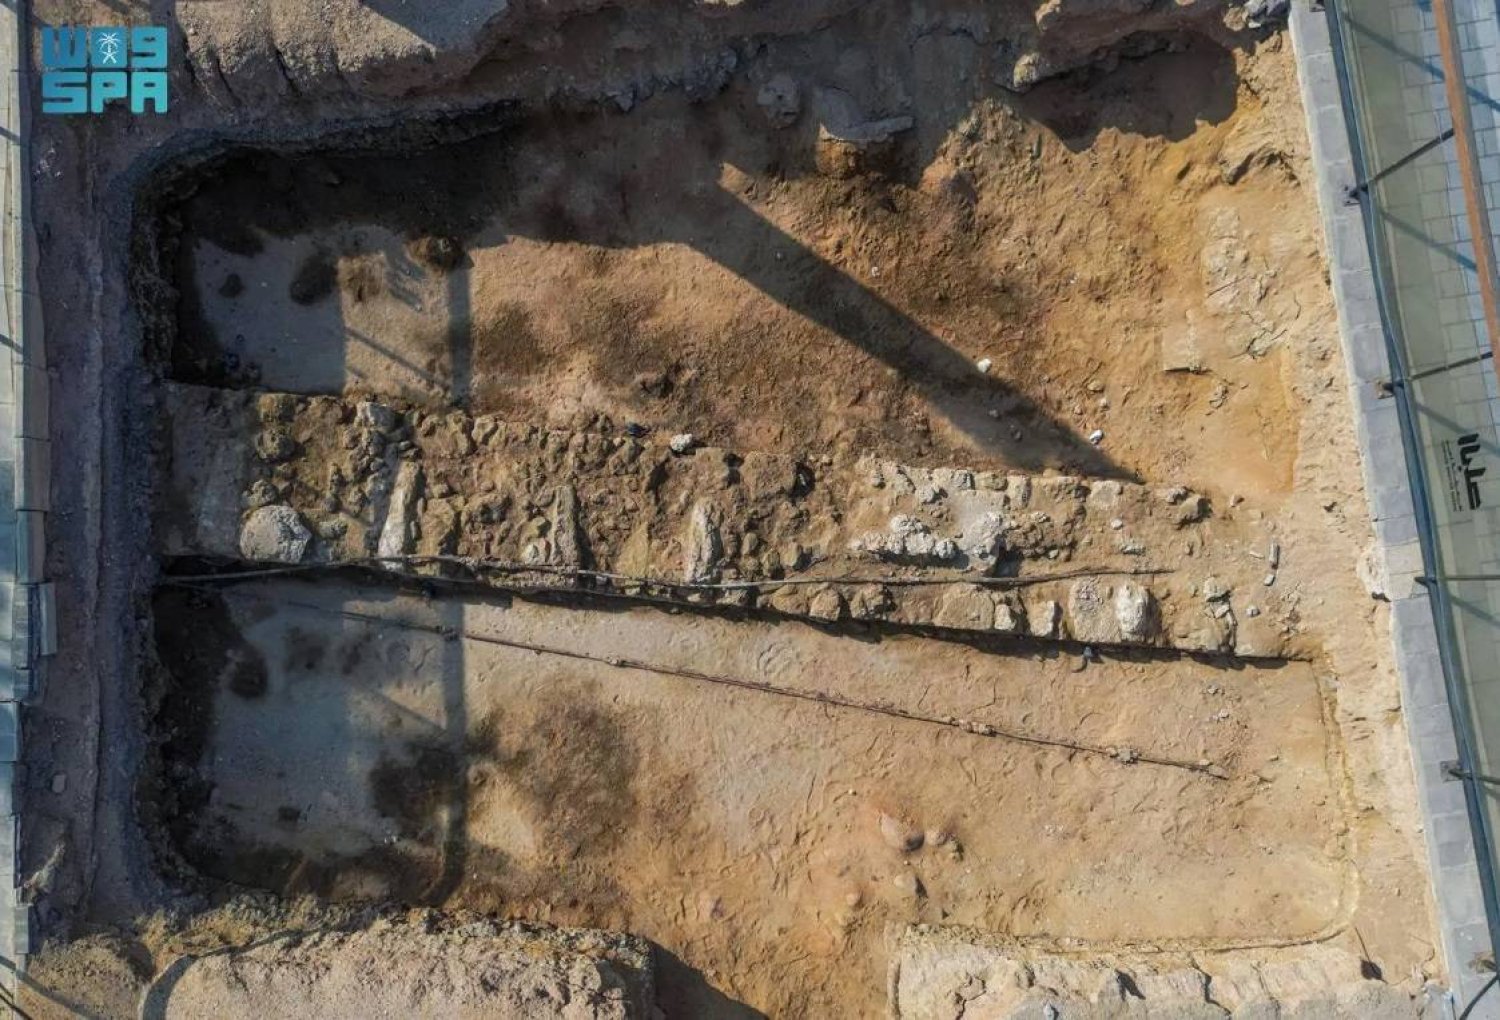 Remains of a centuries-old defensive moat and fortification wall, which once encircled the city, were found in the northern part of Historic Jeddah. SPA 